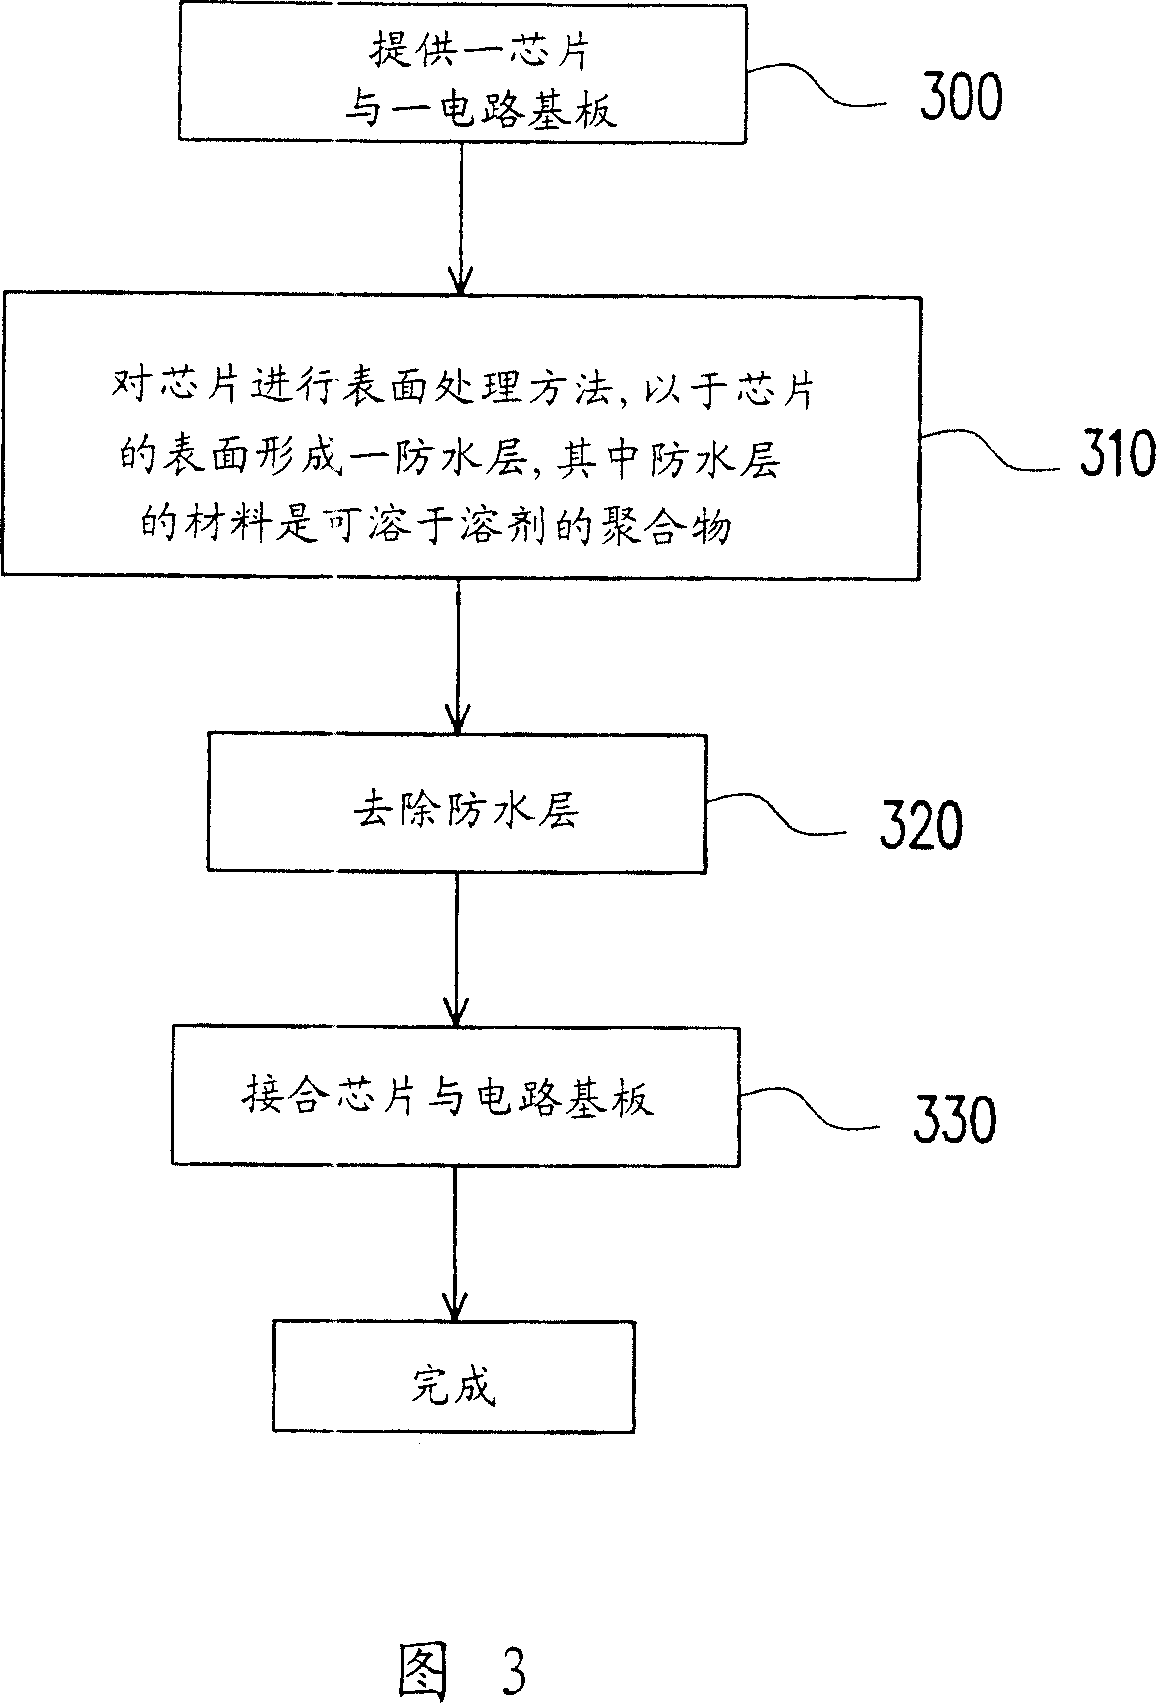 Surface treatment, specification and assembling method for microelectronic element and its storage structure